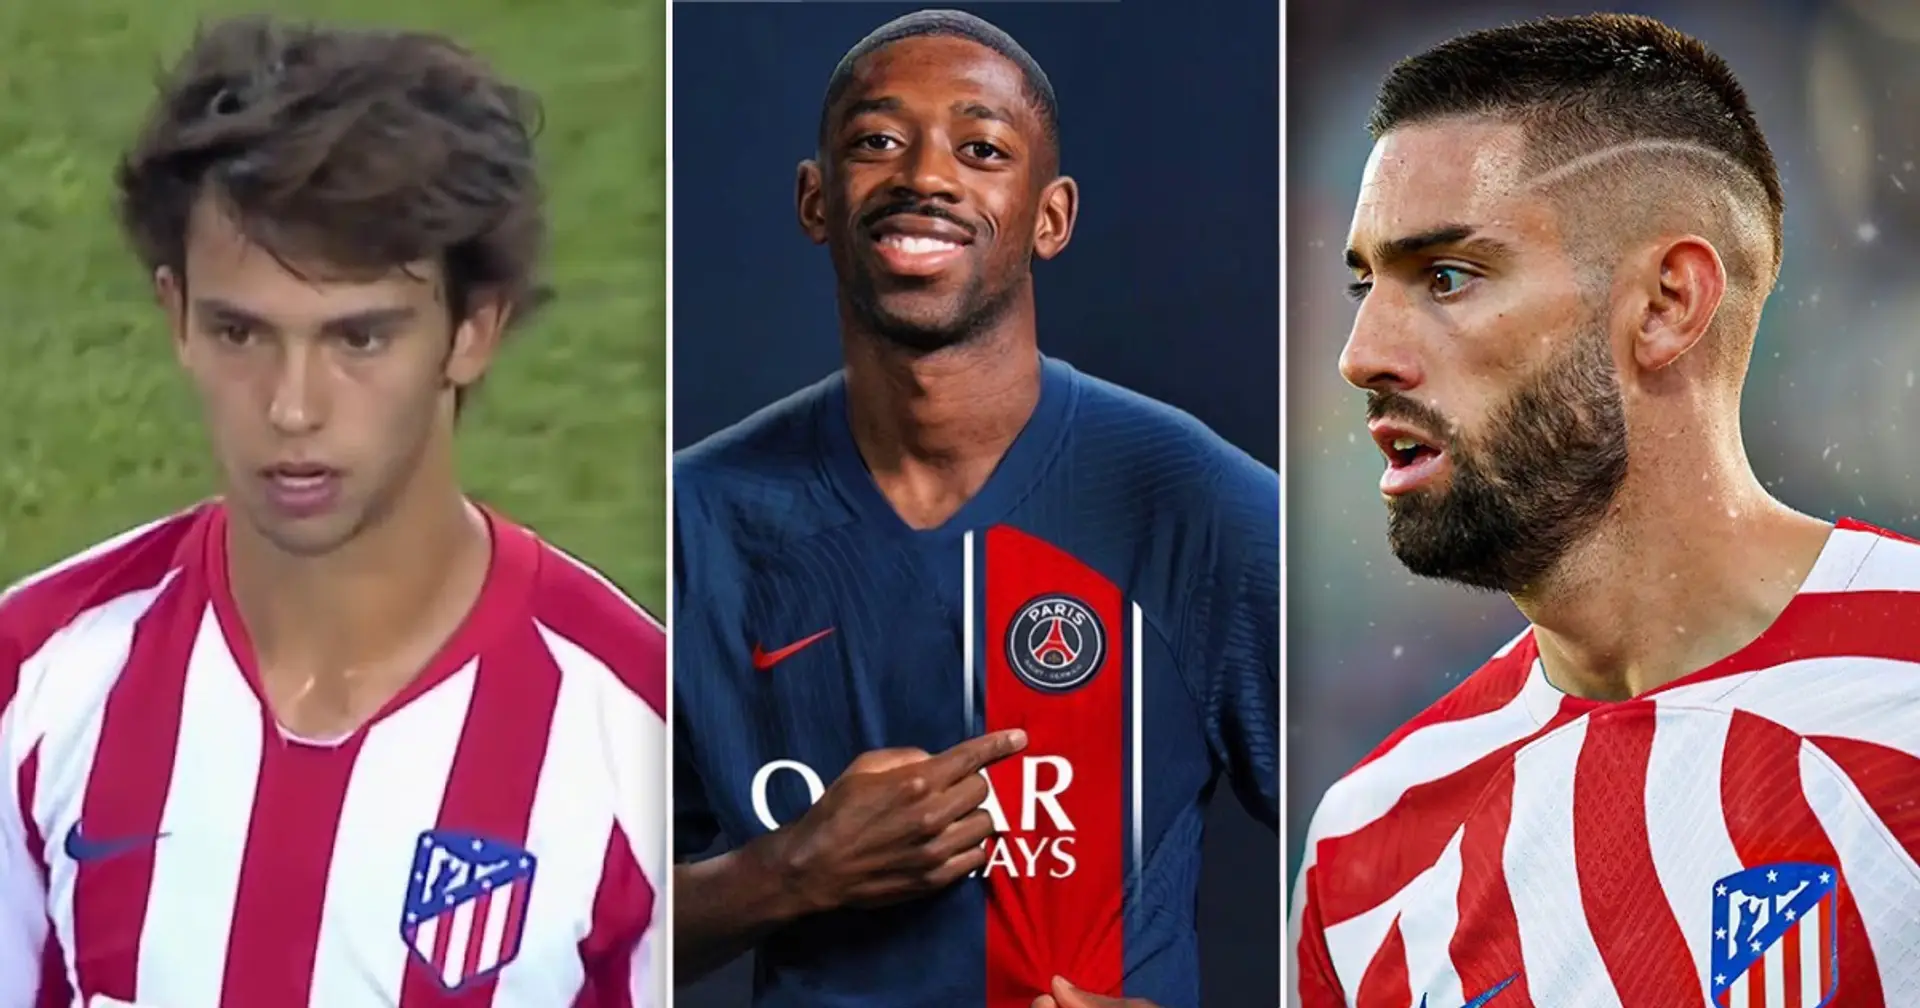 Barca rule out Carrasco and Felix as Dembele replacements (reliability: 5 stars)